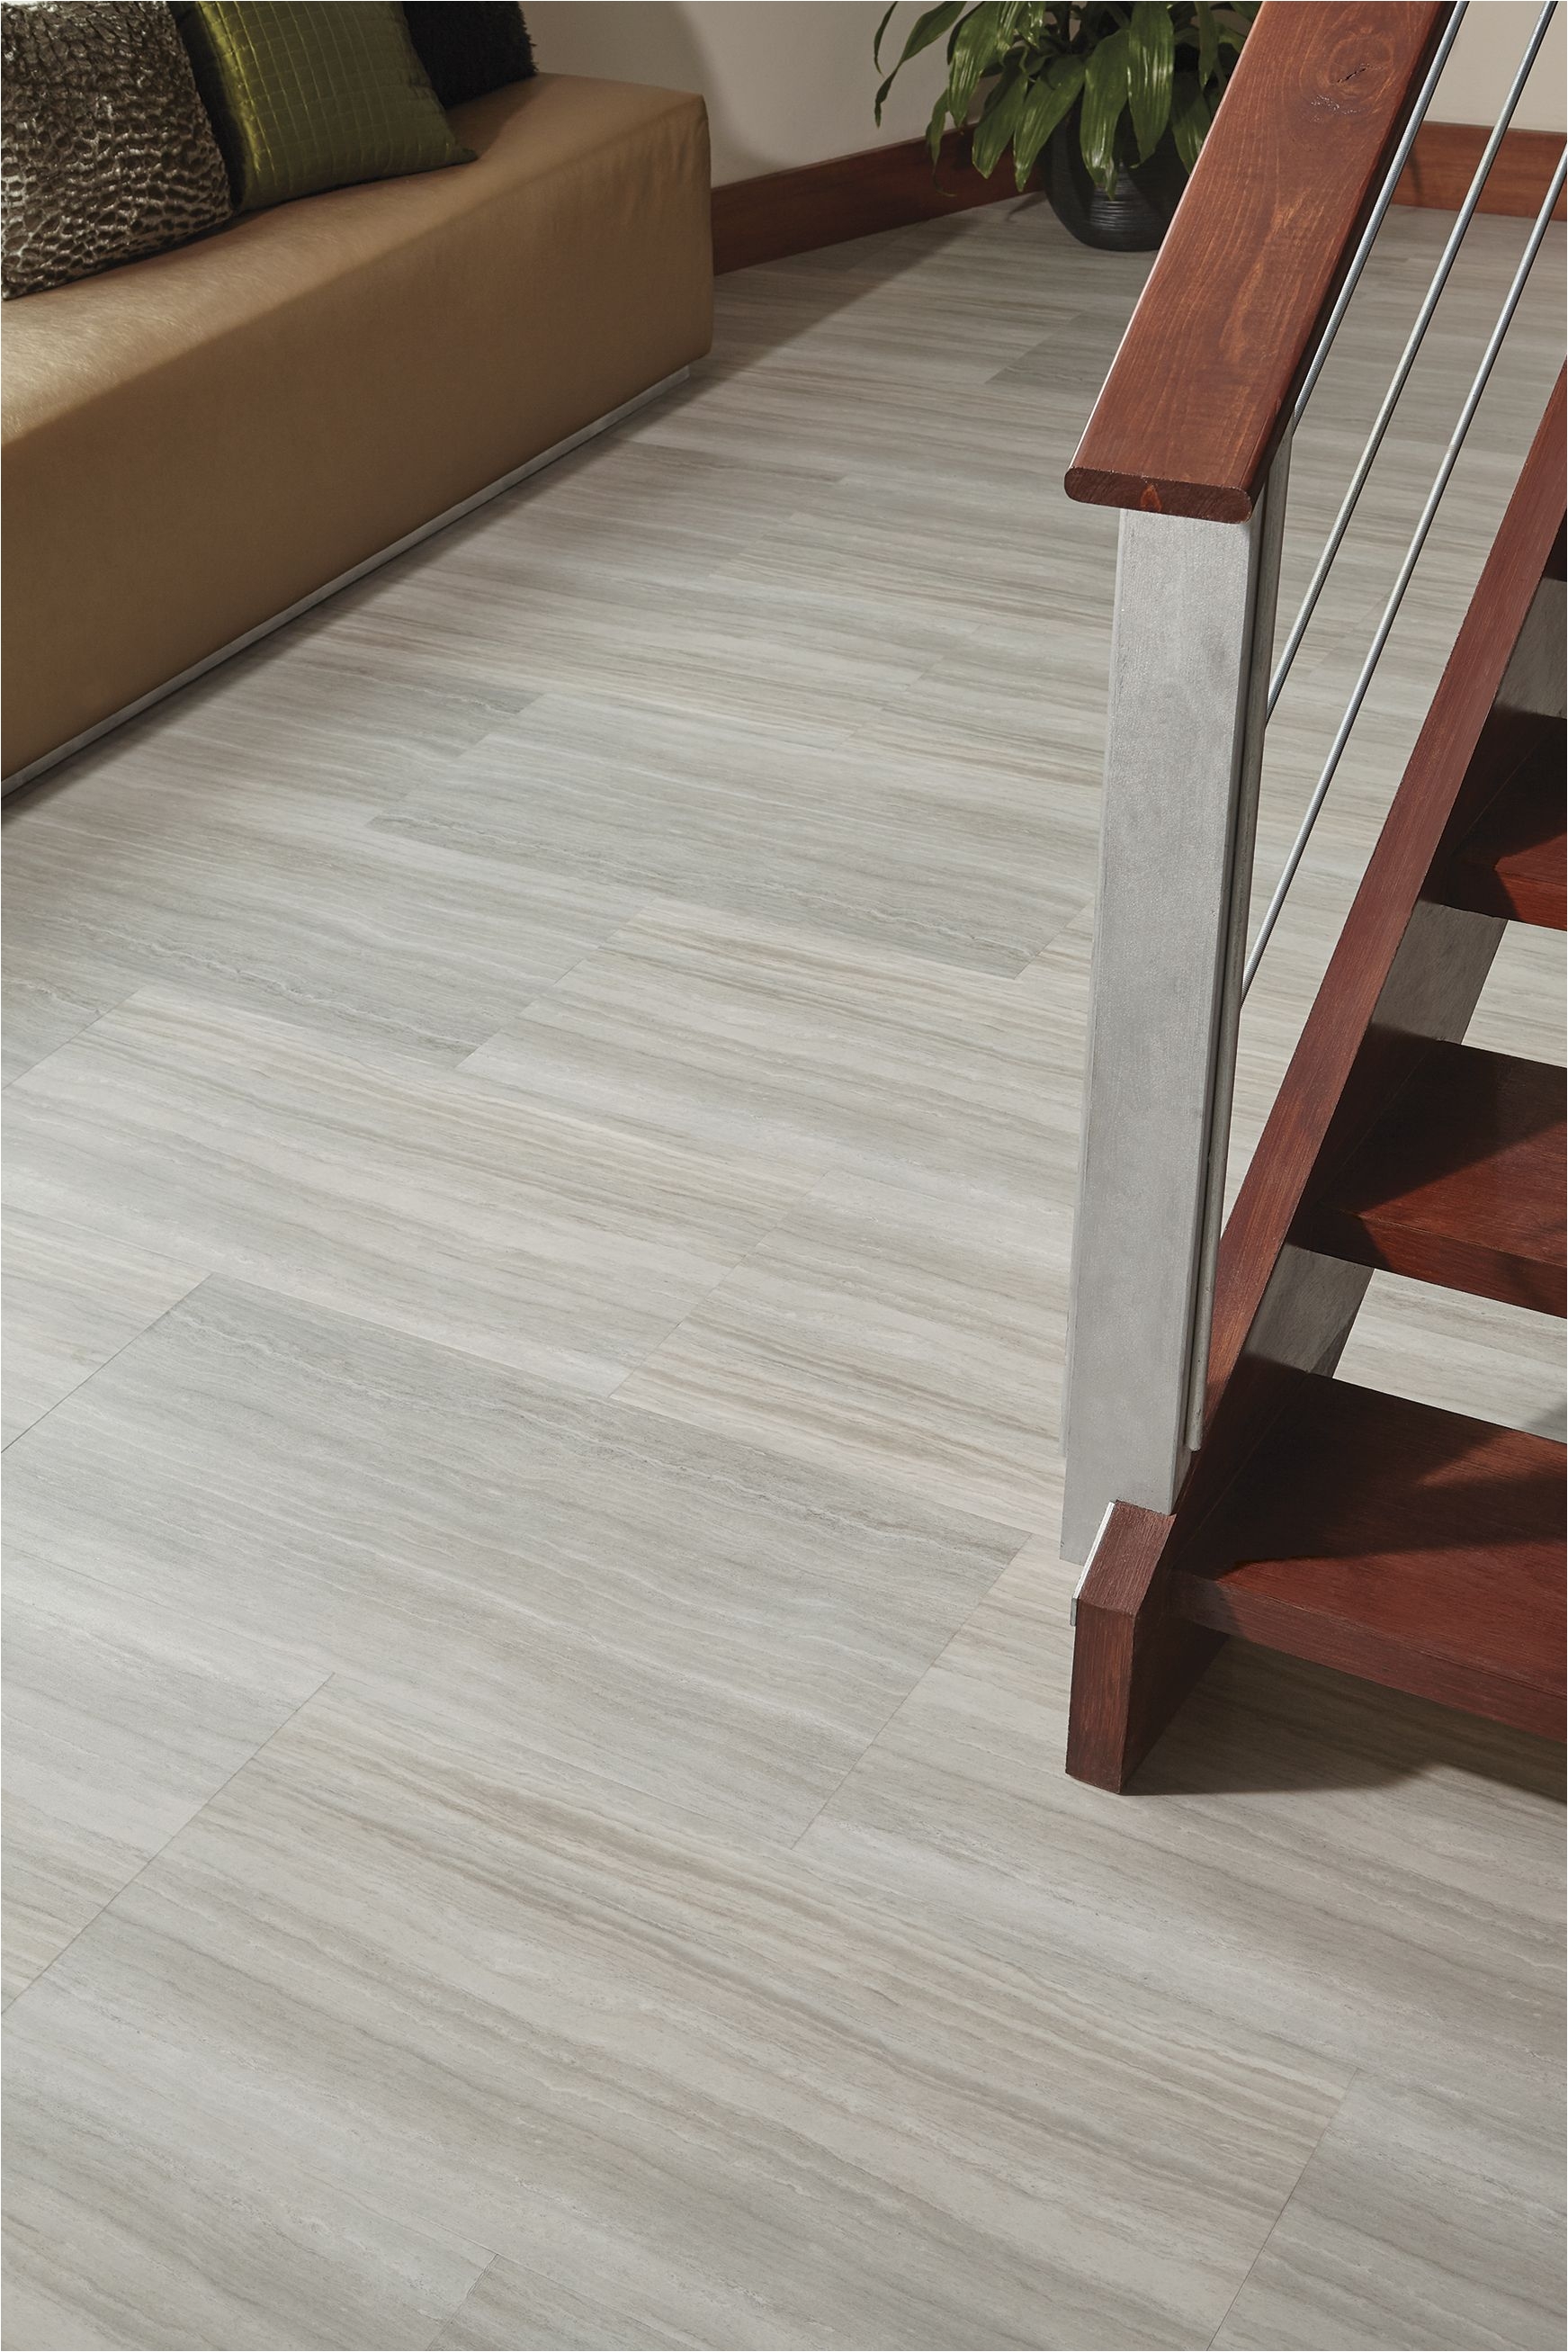 What is the Cheapest Flooring Stainmastera Manor Travertine 5g Floating Plank 17 74 X 35 74 5 0mm